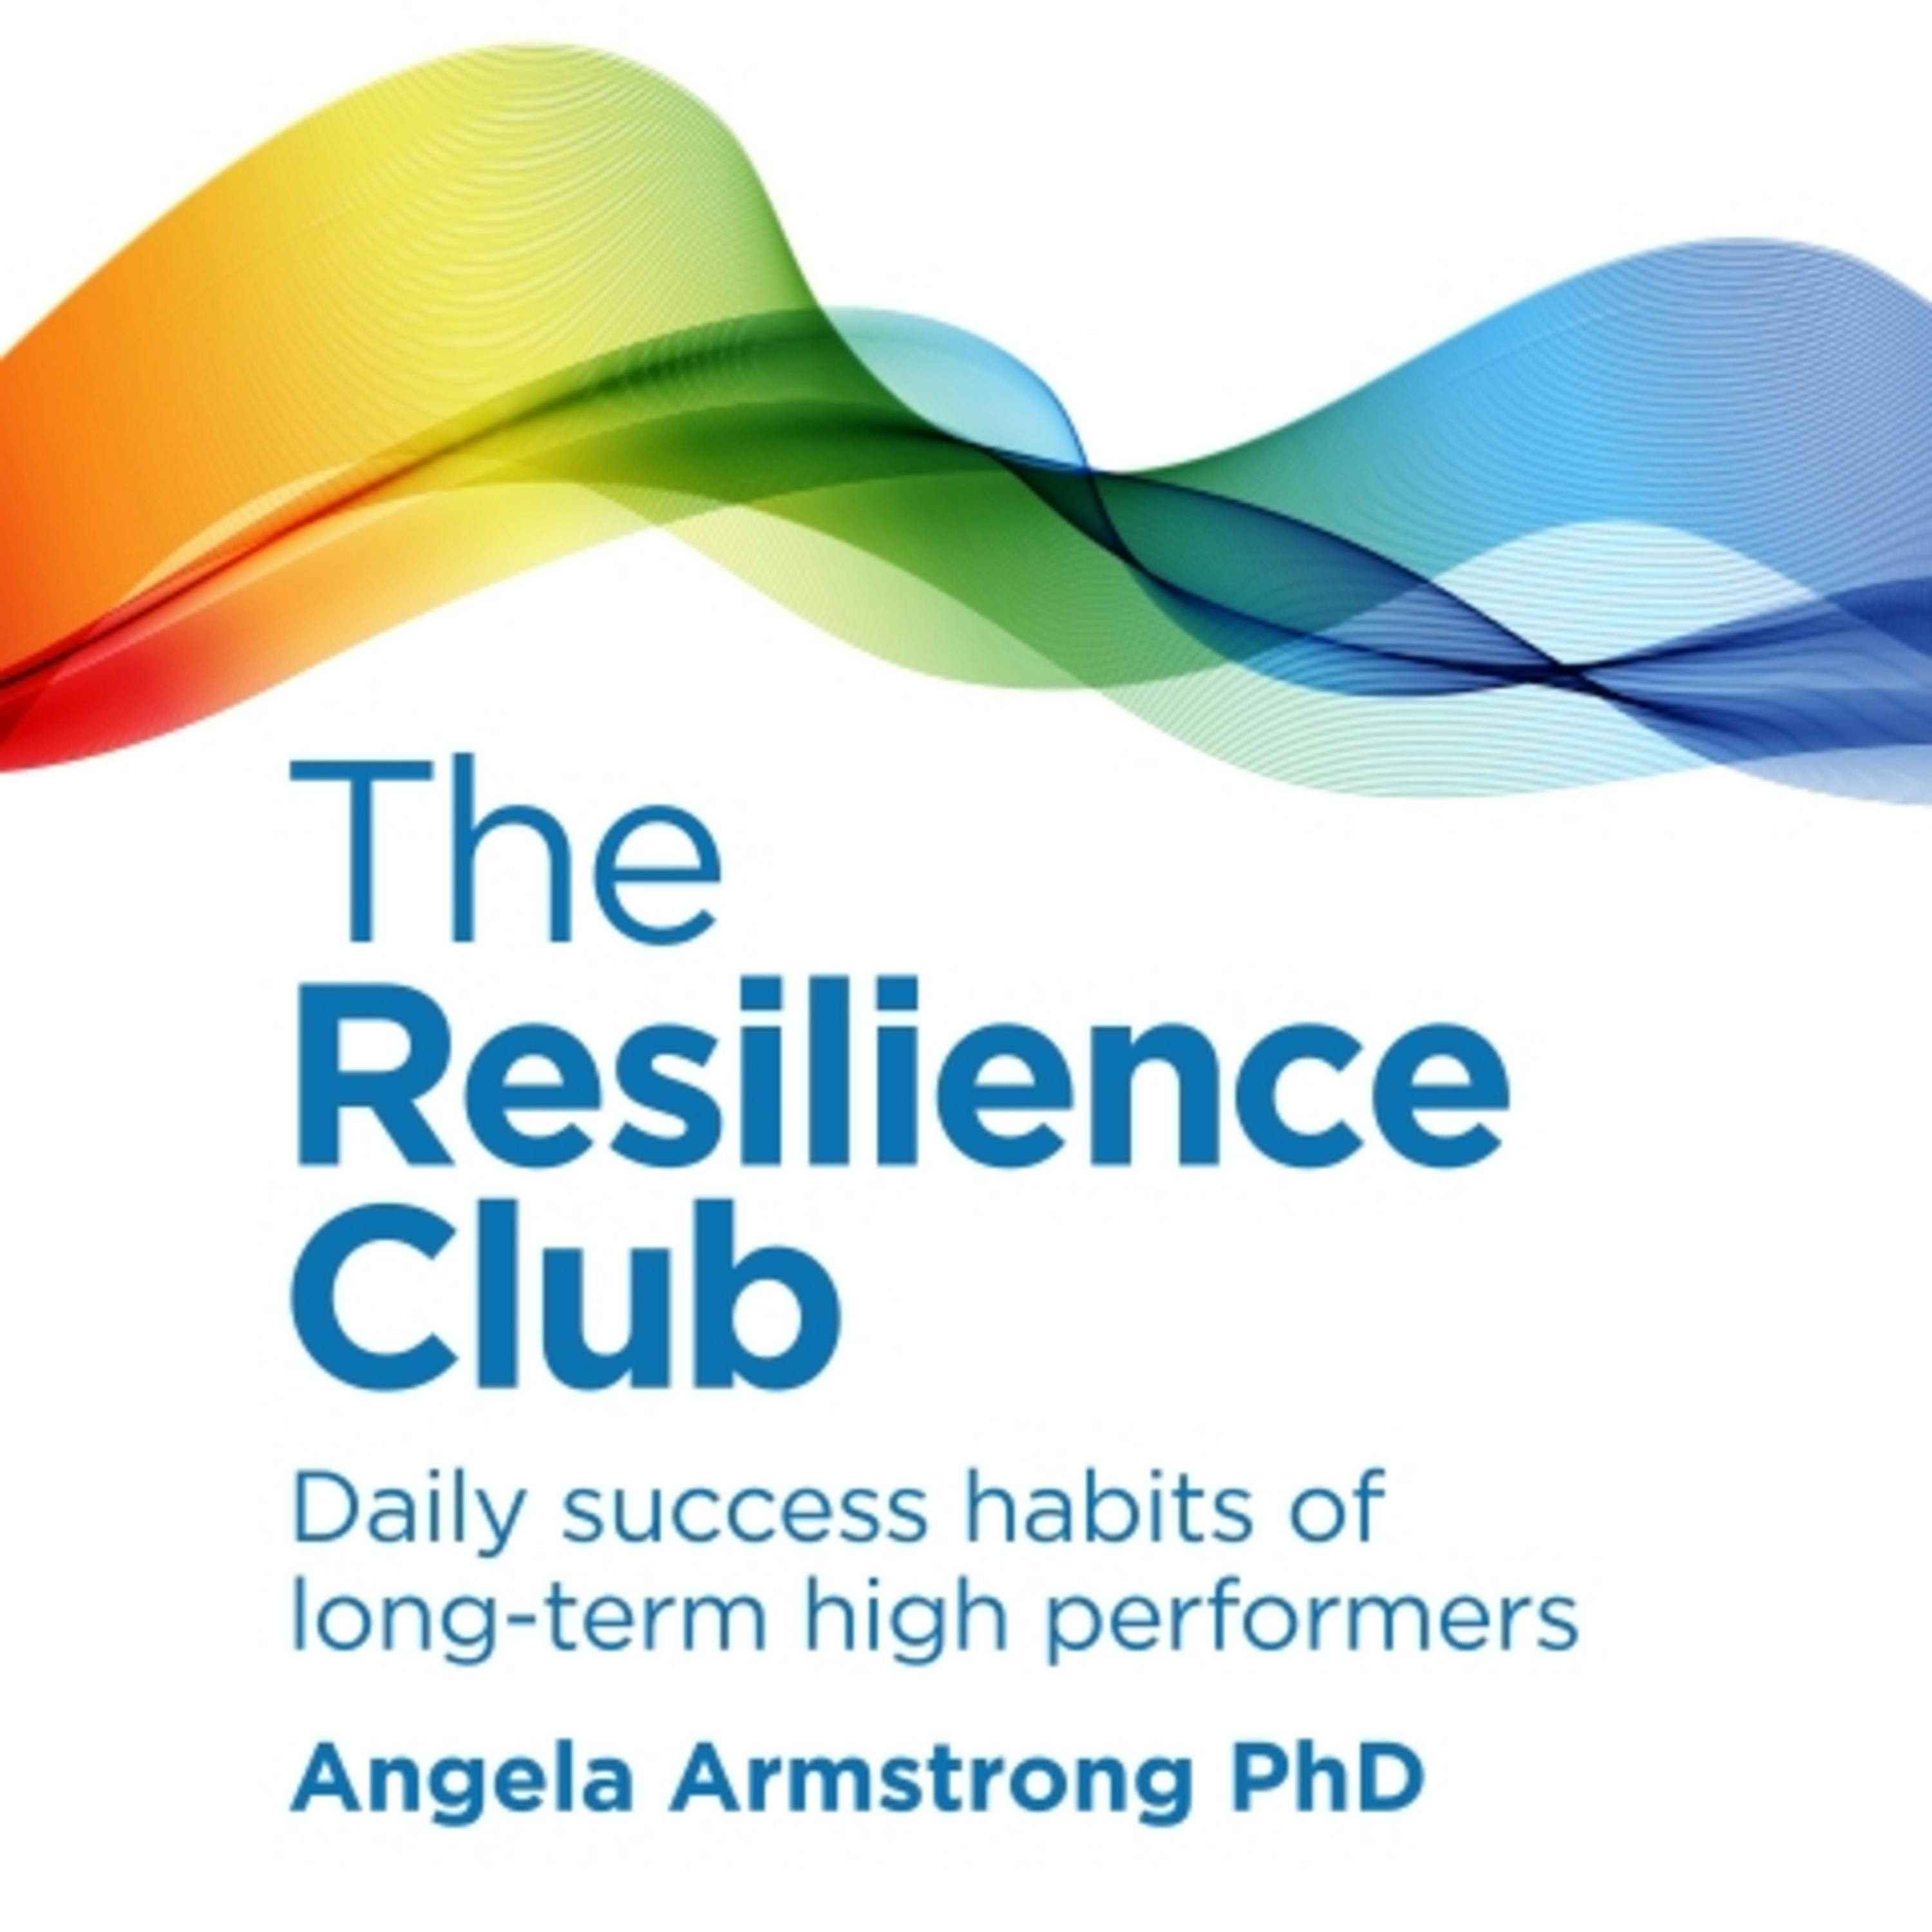 The Resilience Club: Daily success habits of long-term high performers - Angela Armstrong PhD